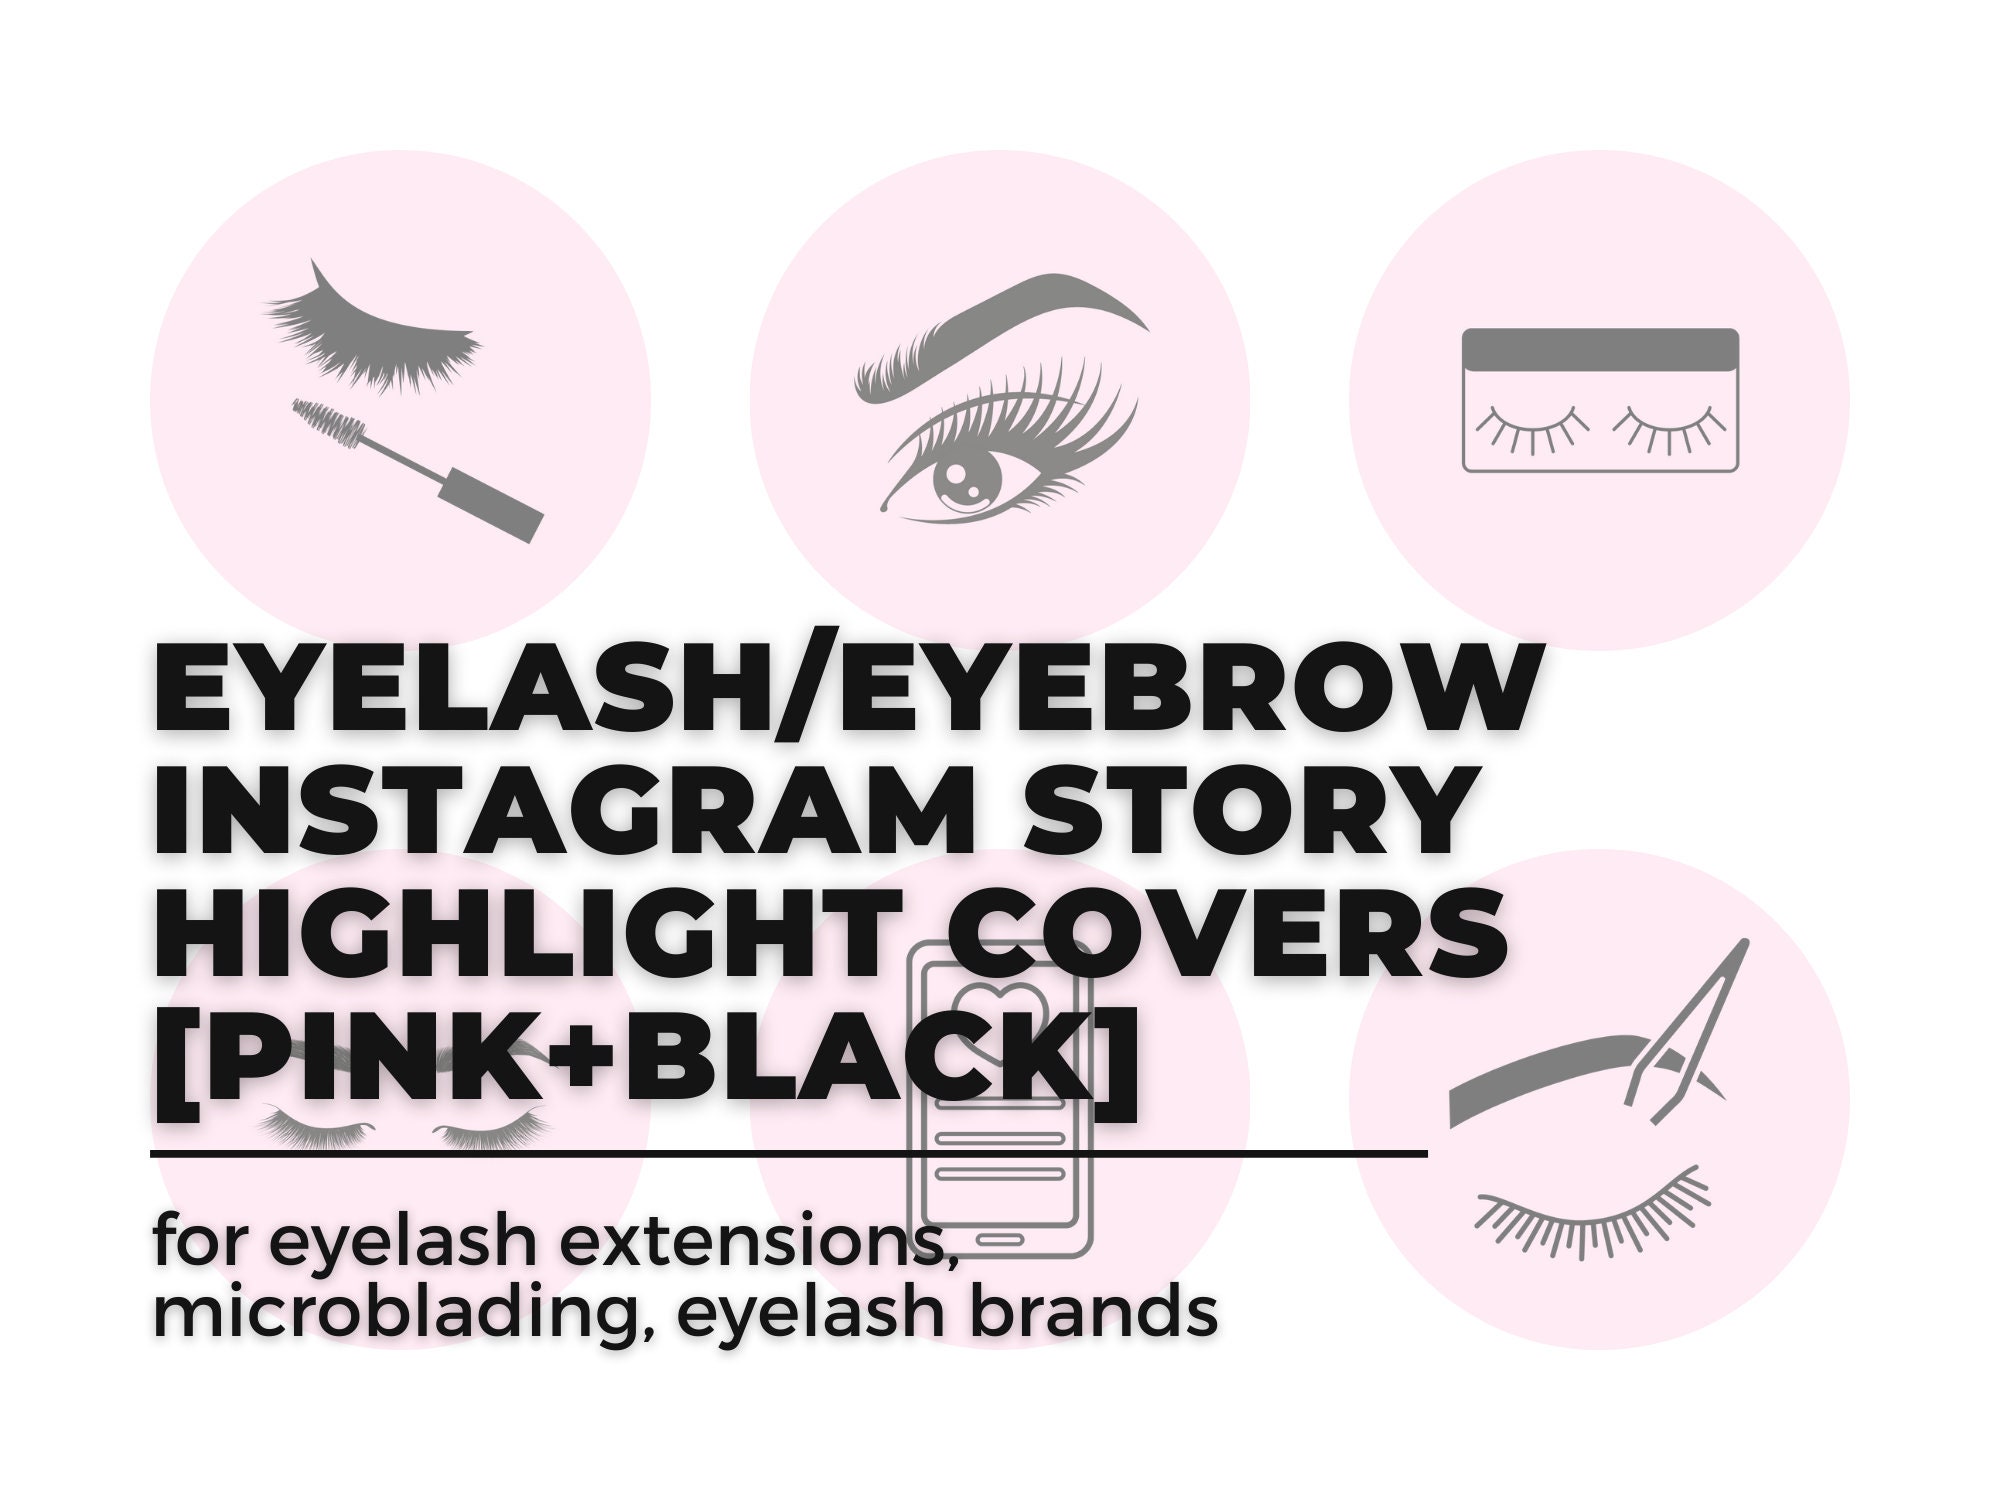 IG Story Covers Beauty Studios Pink And Black 30 Instagram Story Highlight Covers for Eyelash Extensions Eyelash Brands Microblading